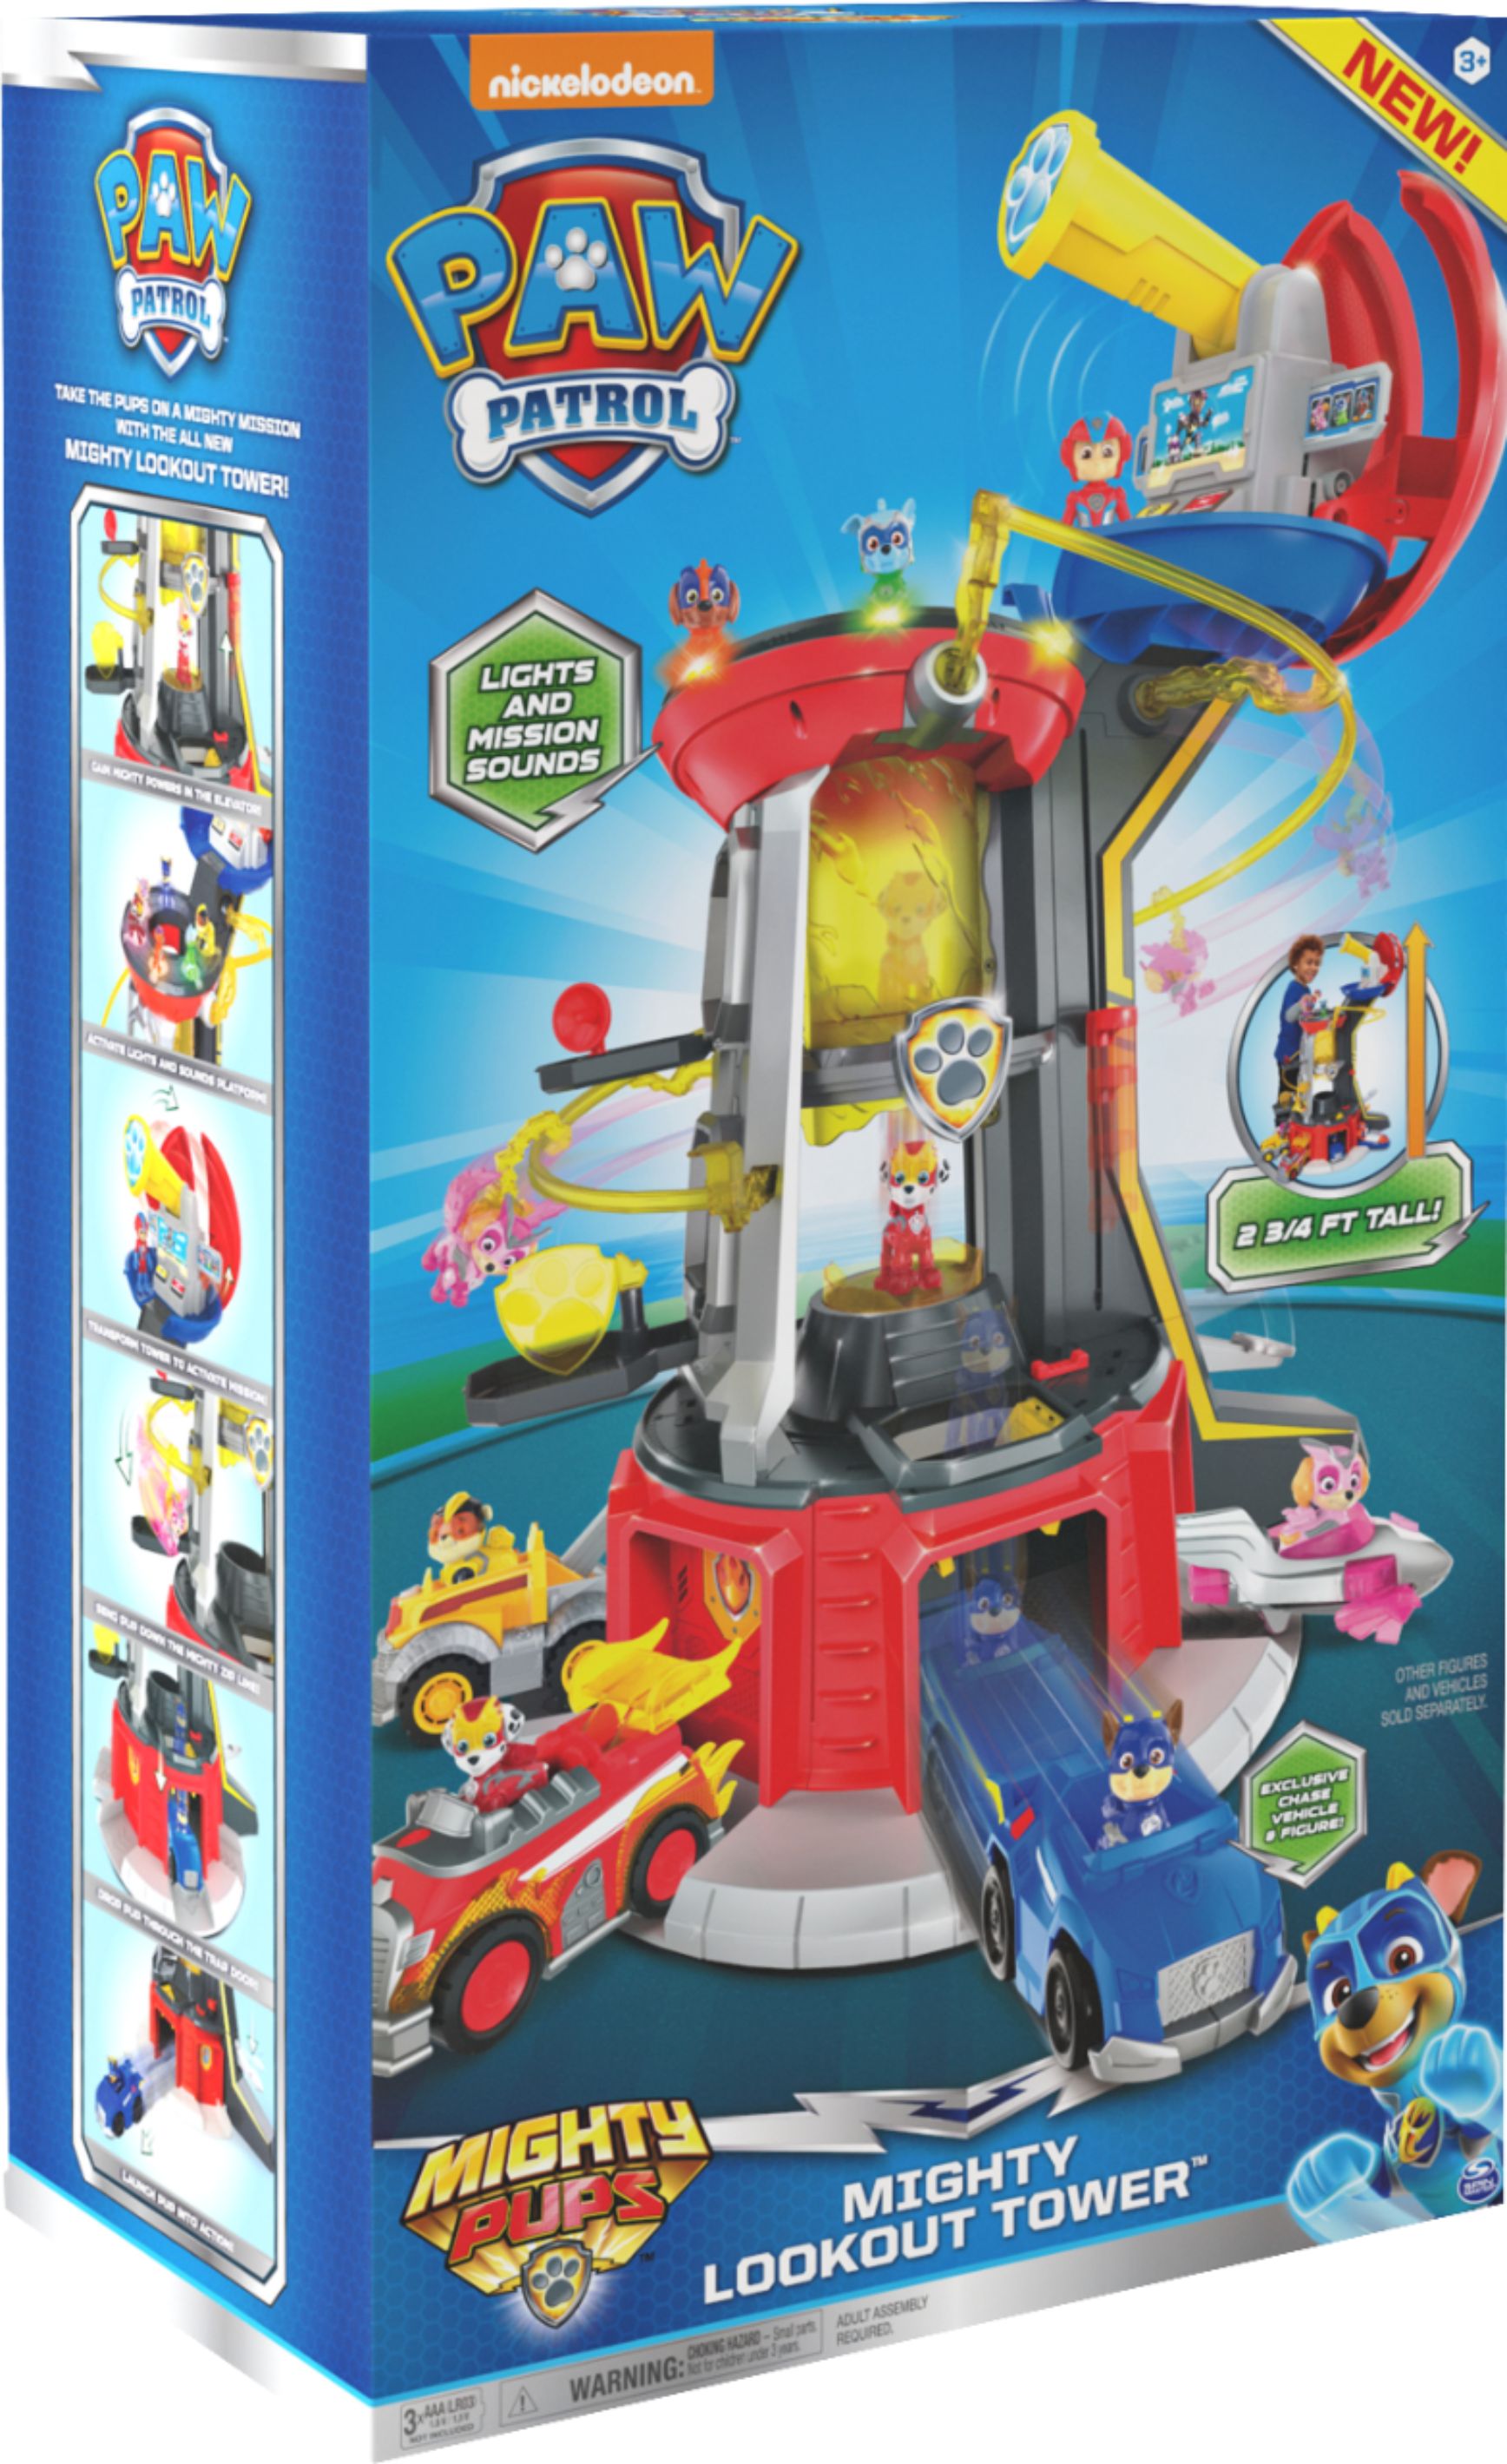 Paw Patrol Mighty Pups Super Paws Lookout Tower Playset Stores